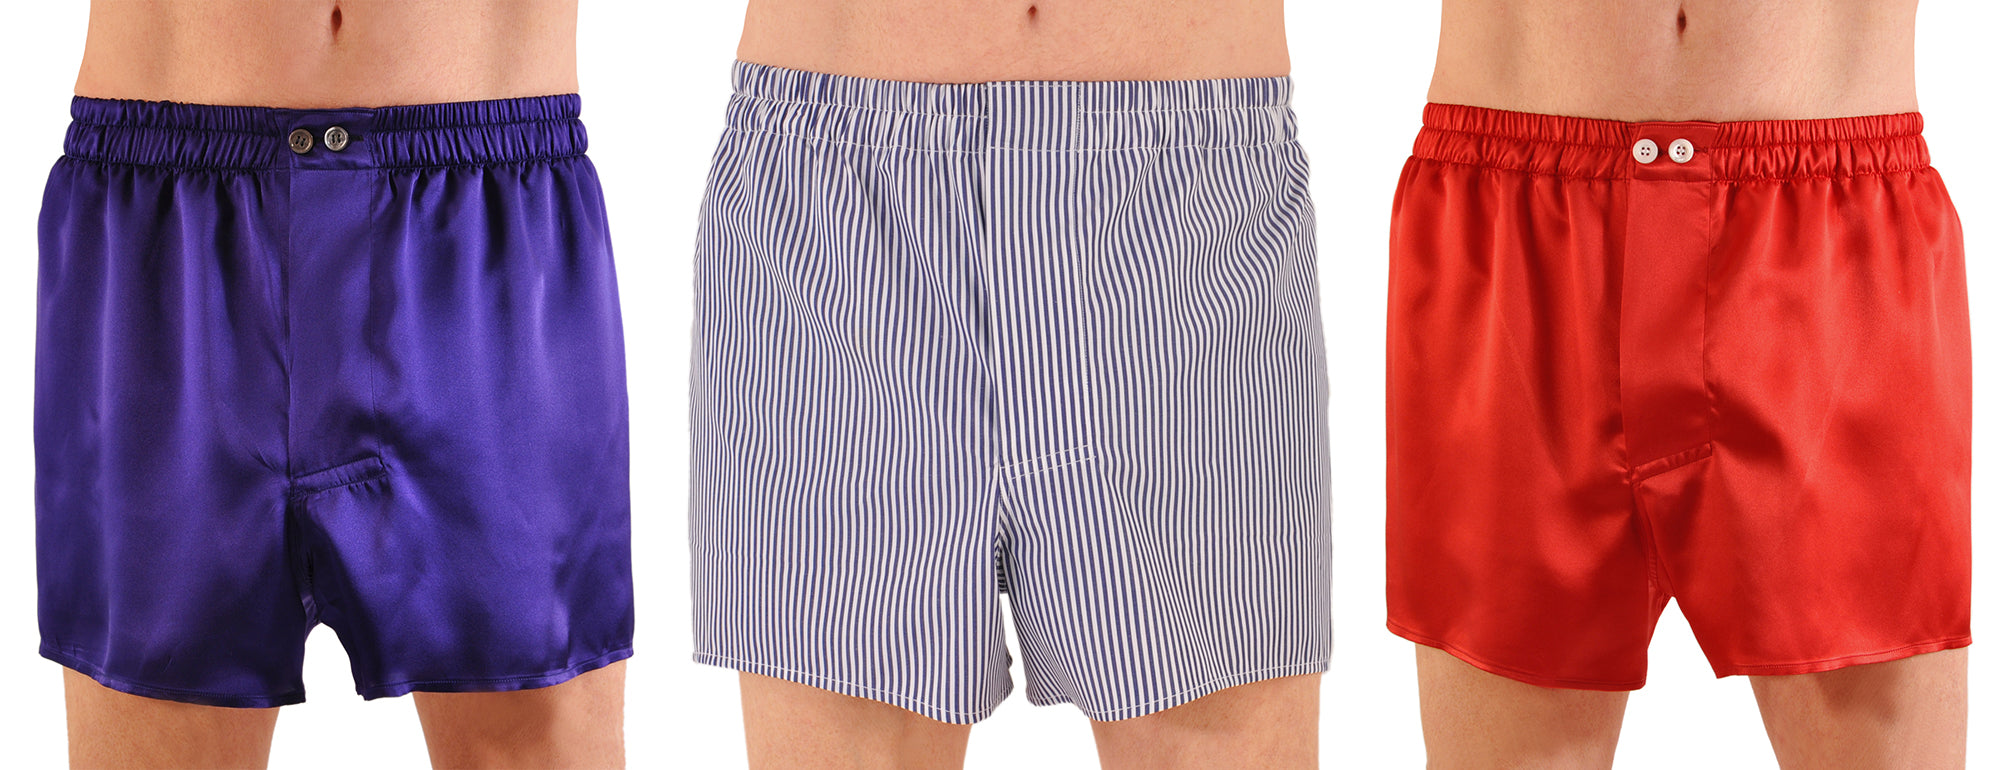 What is the difference between boxer briefs and plain boxers? Why